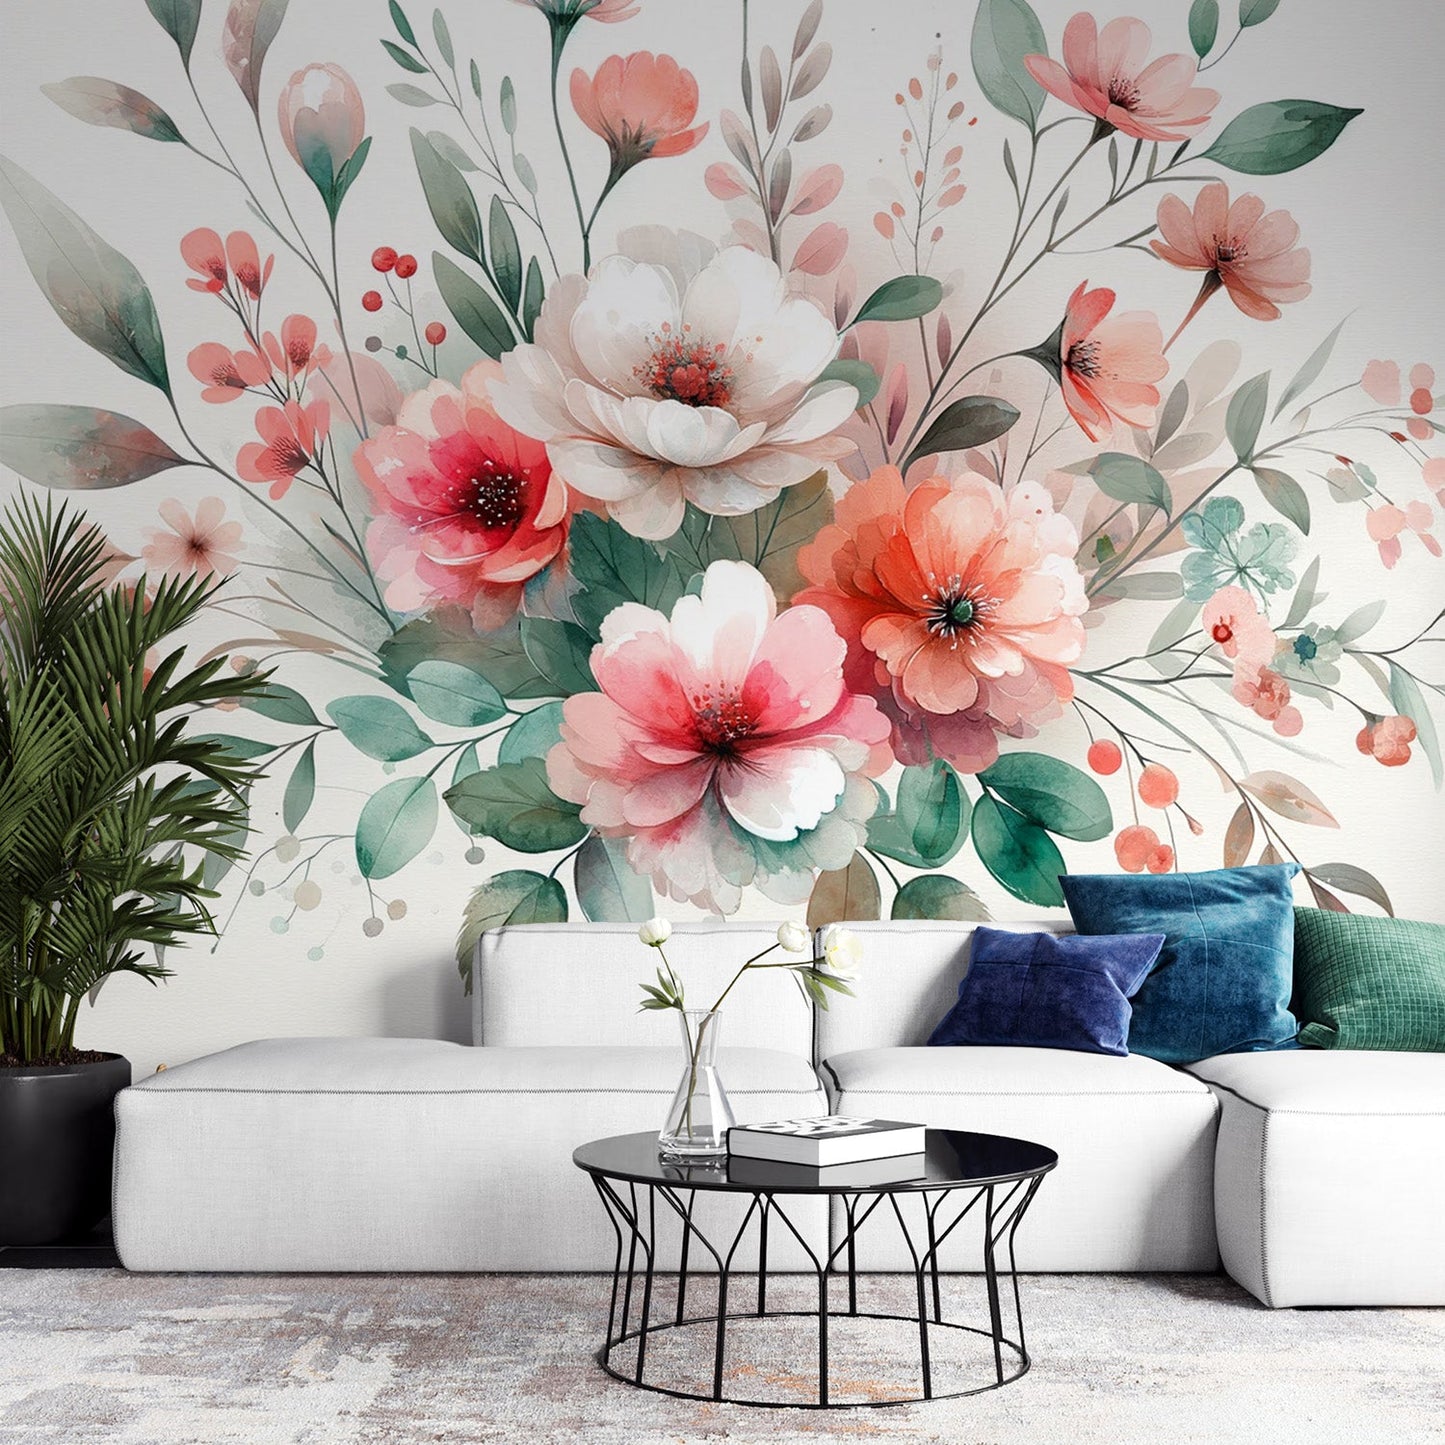 Pastel floral wallpaper | Watercolour floral composition in pink and white